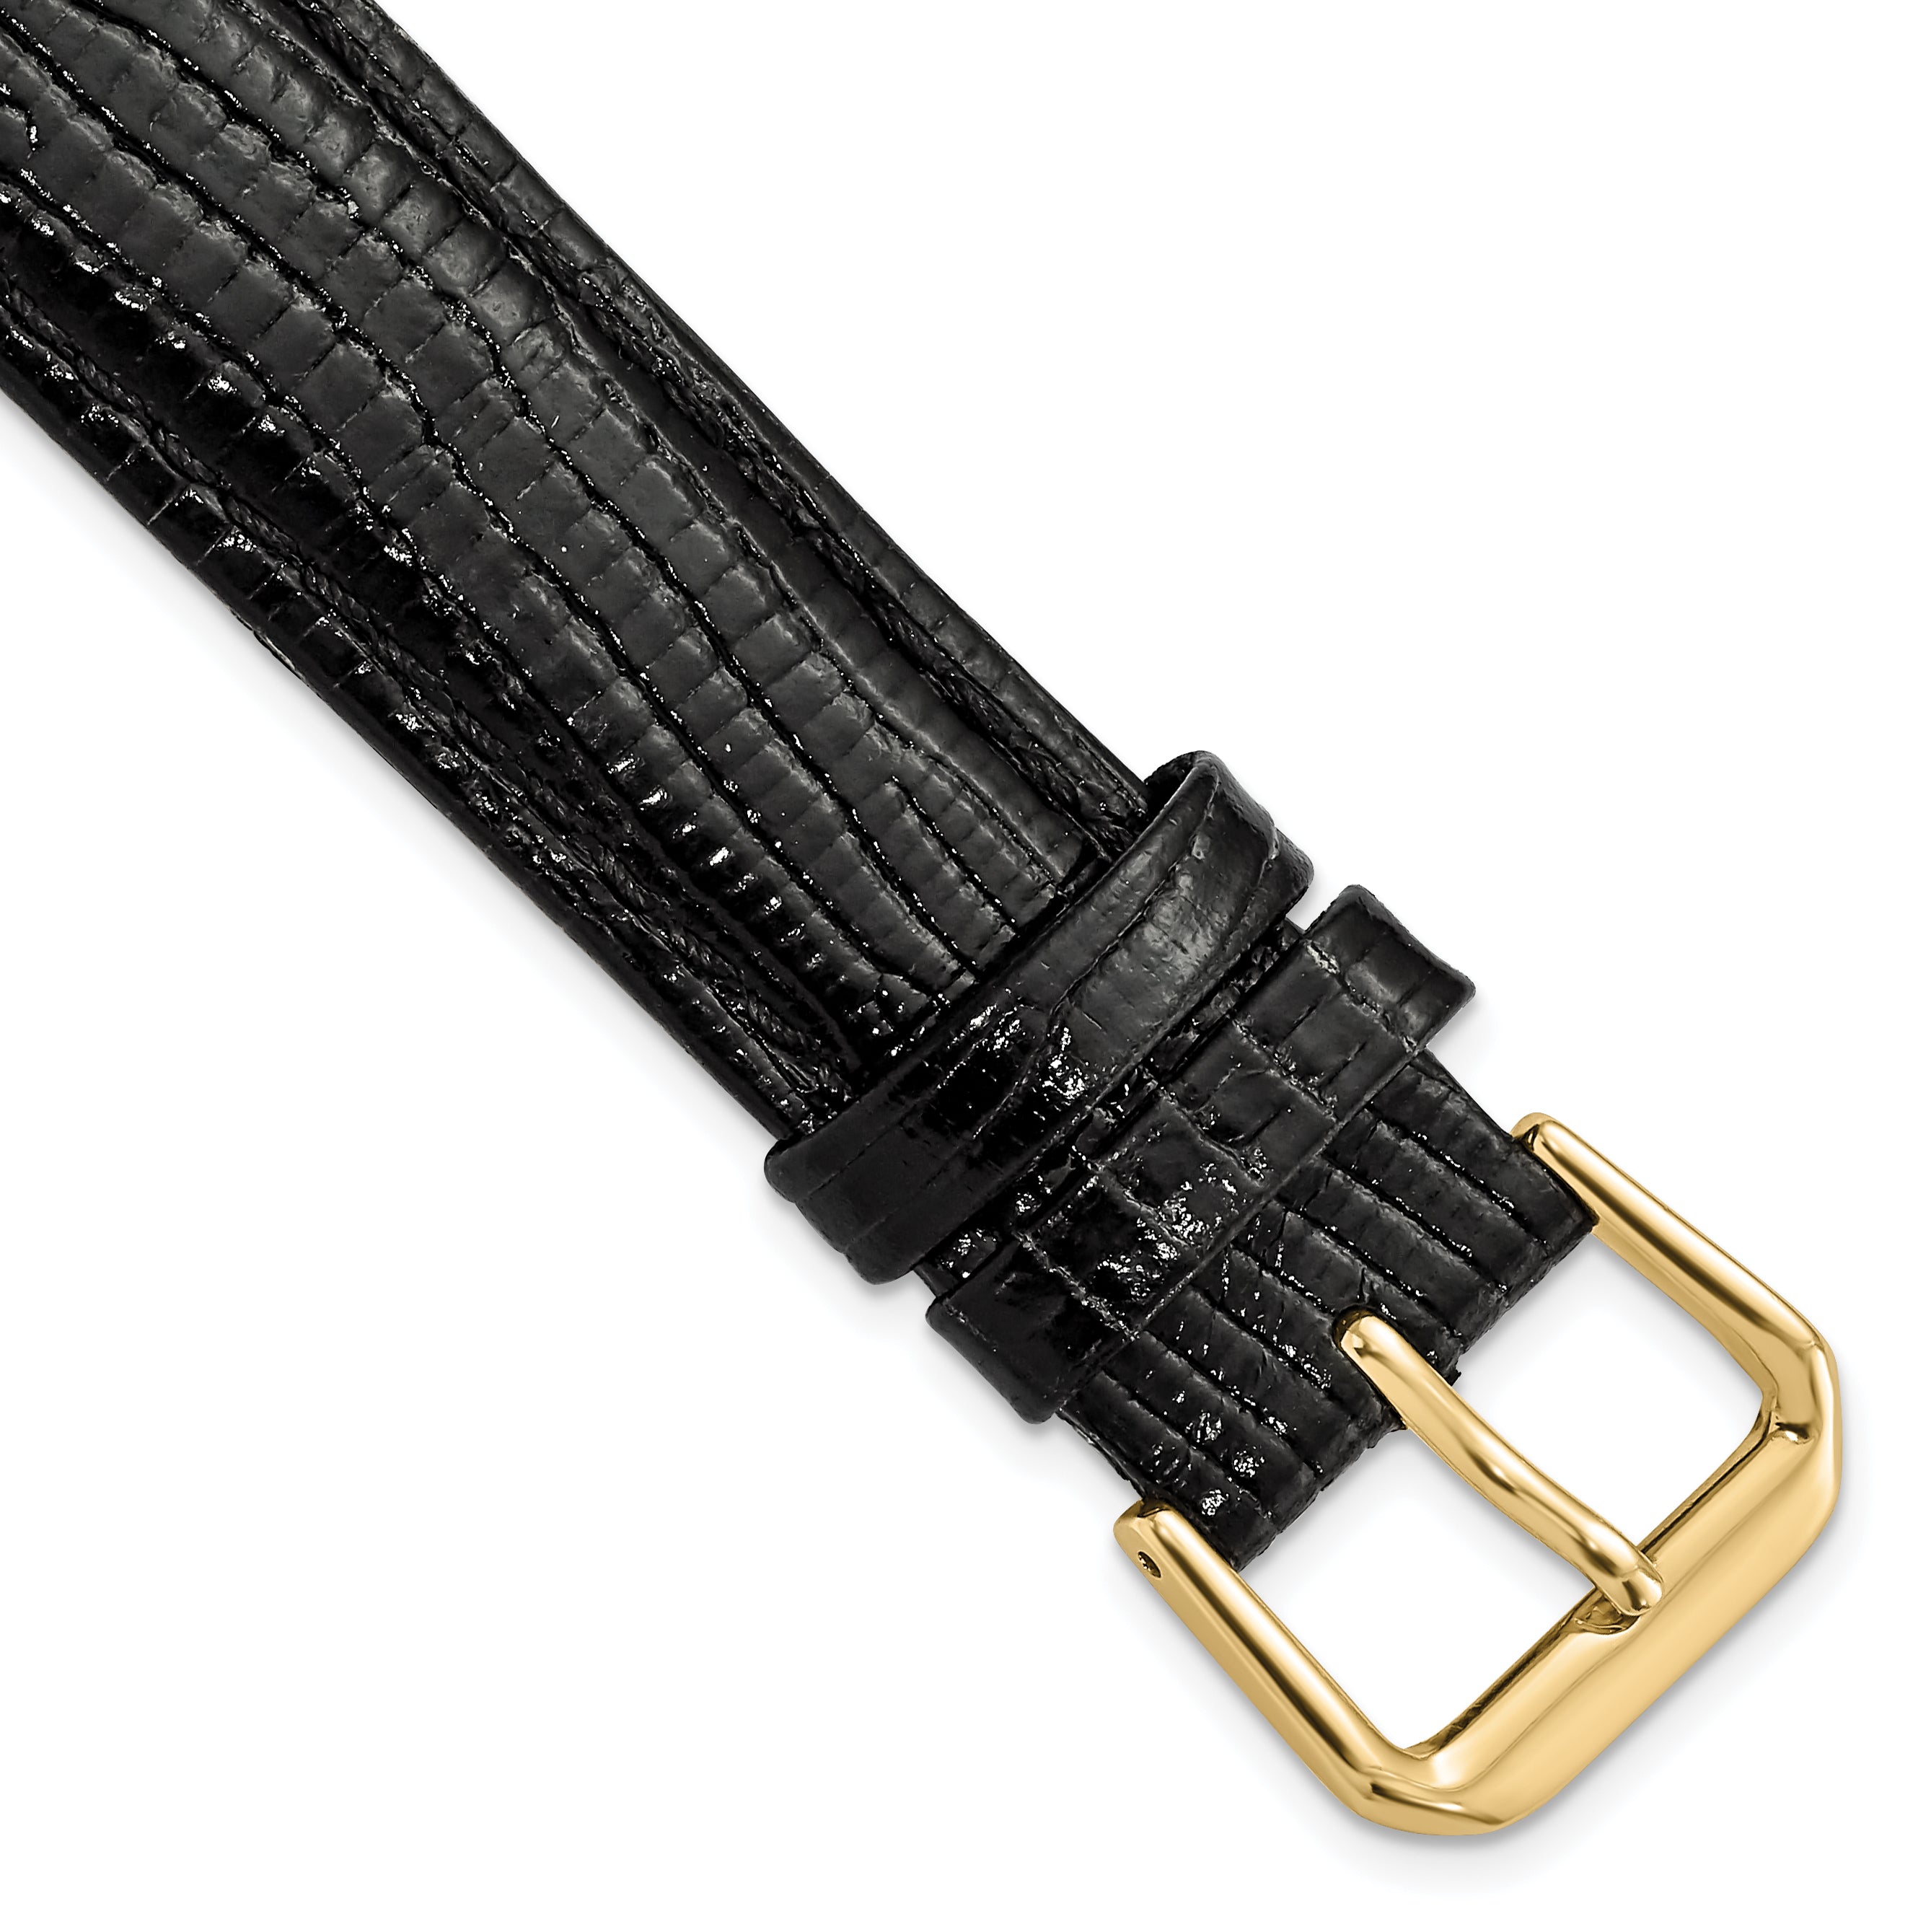 DeBeer 18mm Black Snake Grain Leather with Gold-tone Buckle 7.5 inch Watch Band